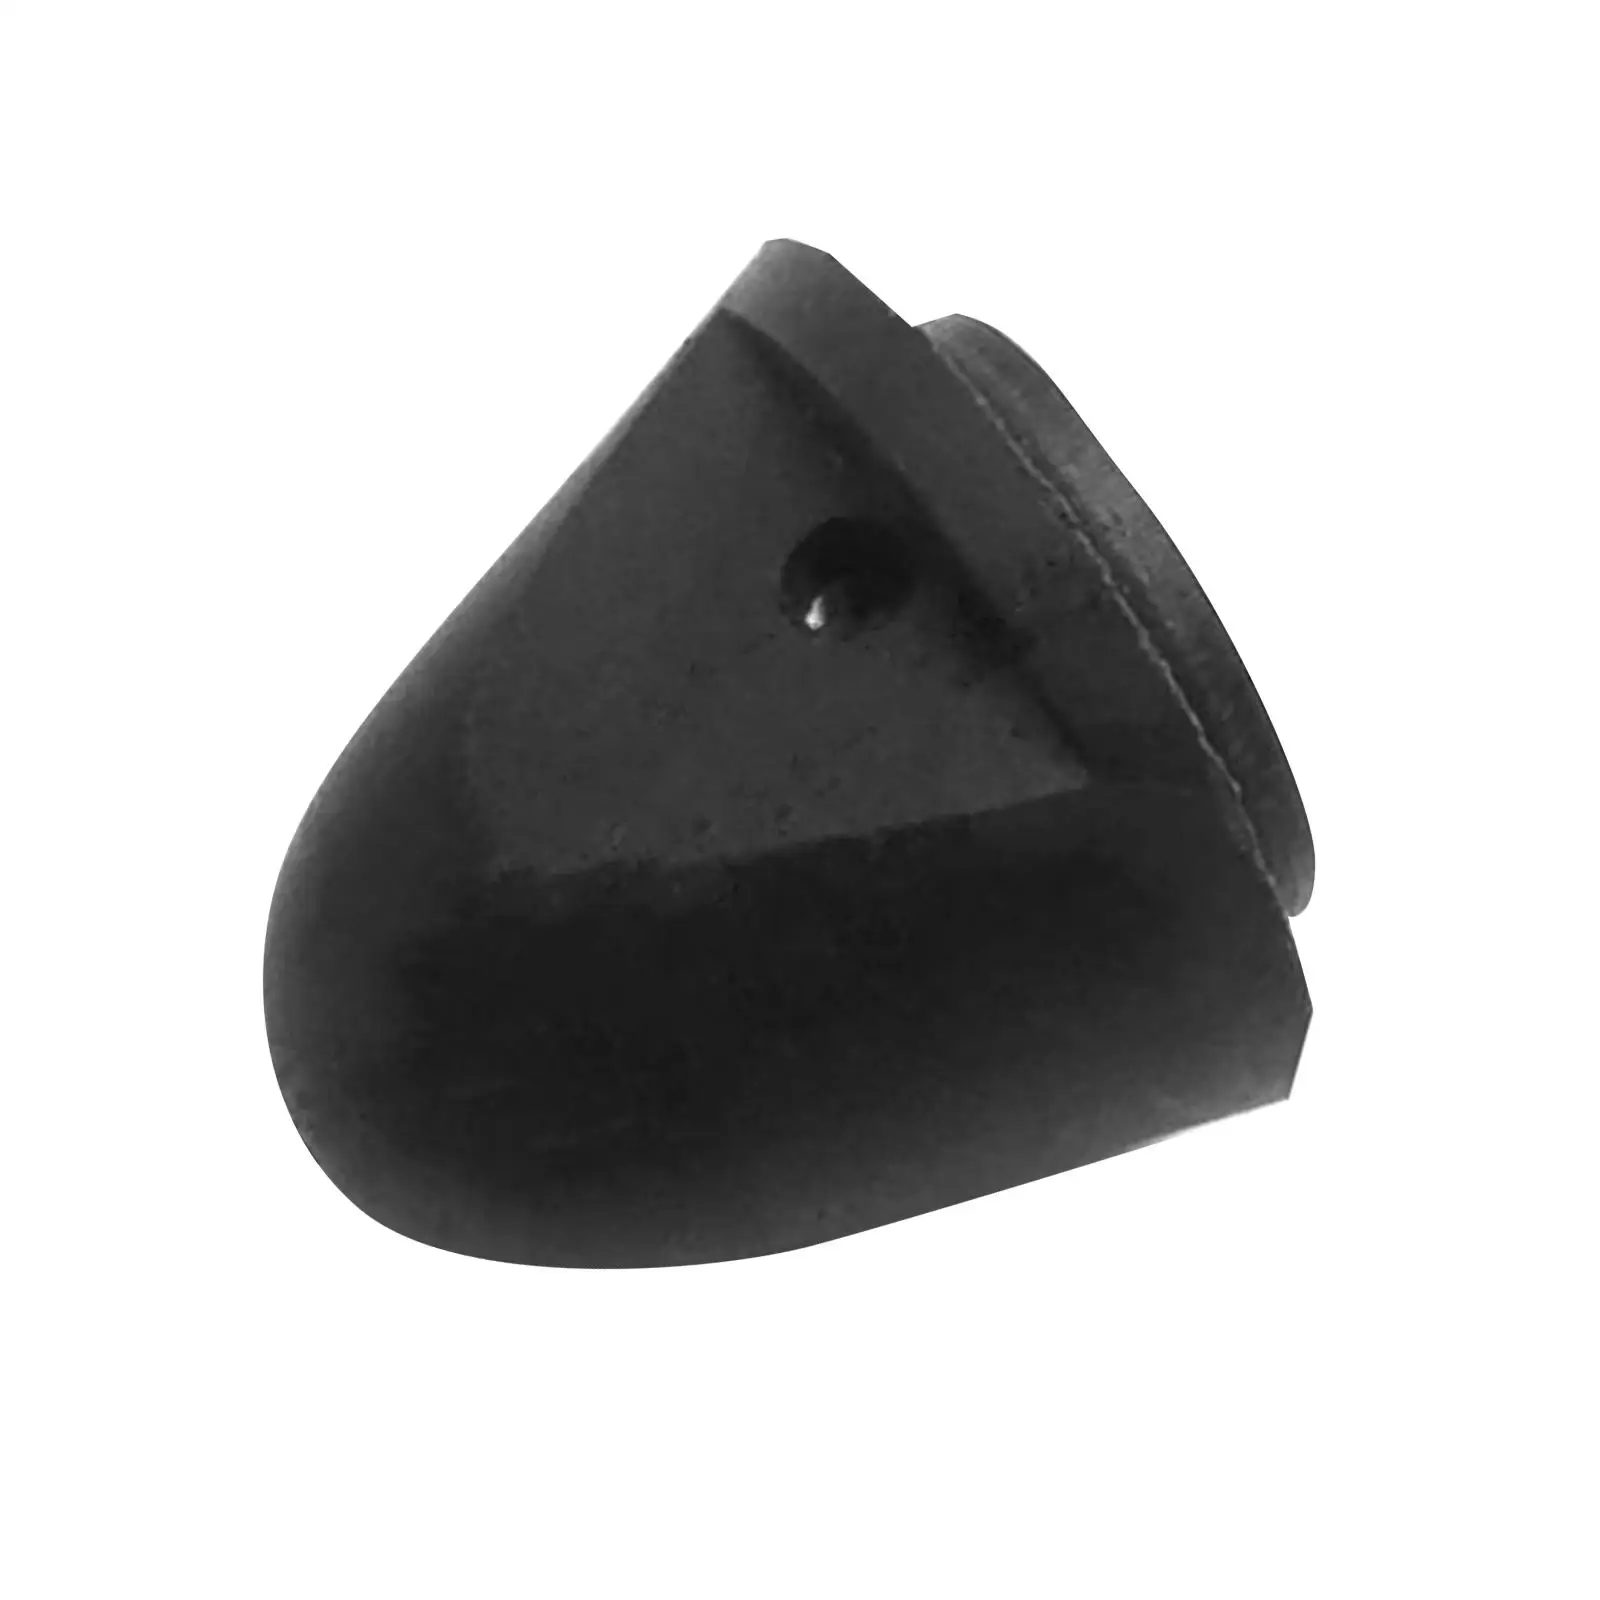 Propeller Prop Nut 647-45616-02-00 for Yamaha Outboard Engine 4HP 5HP 2 Stroke Durable Easy Installation